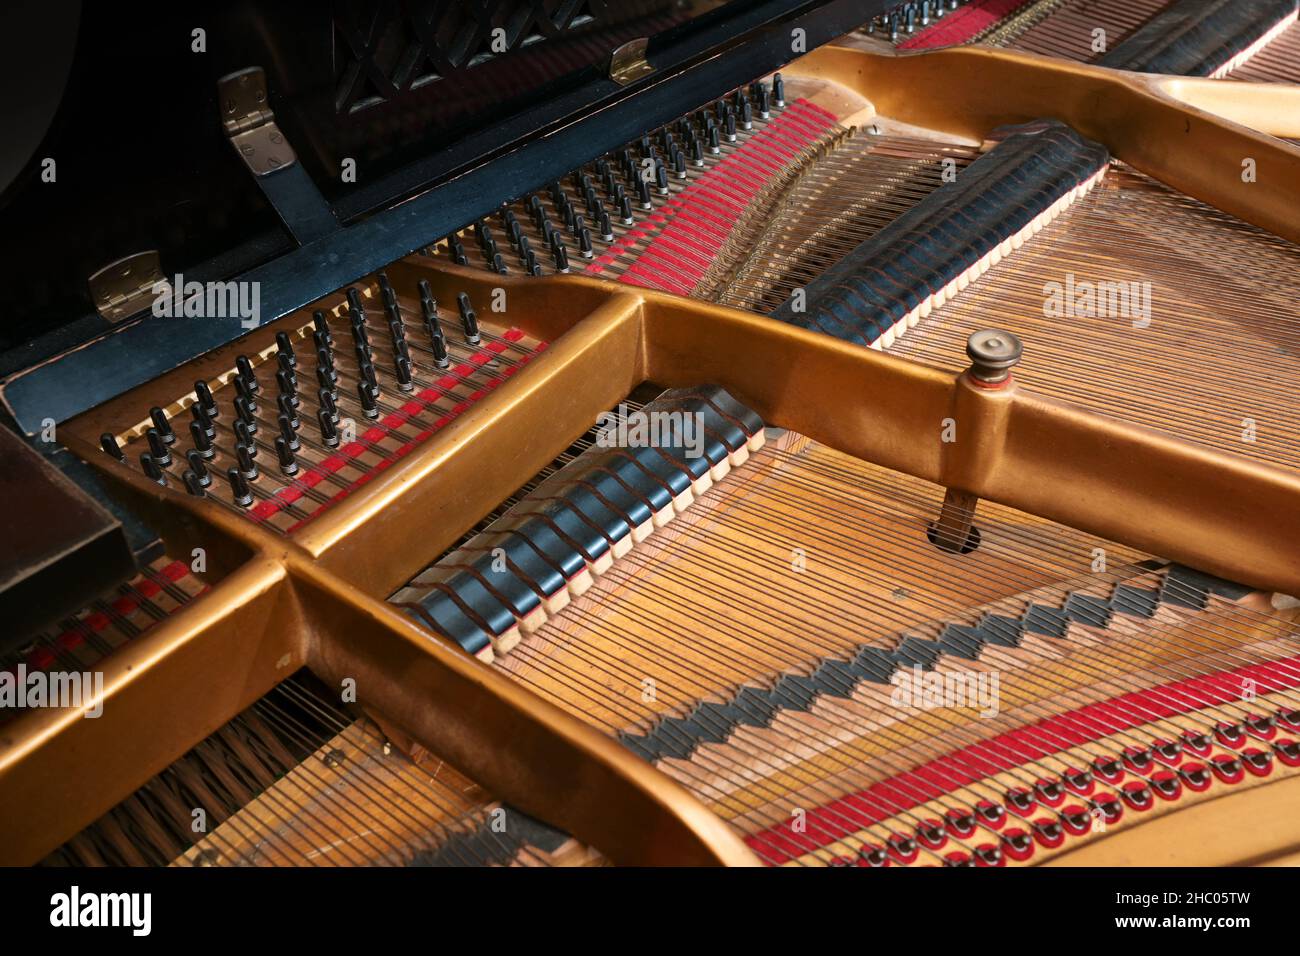 Inside a grand piano, metal frame, strings and mechanics of the old acoustic musical instrument, music themes, selected focus narrow depth of field Stock Photo